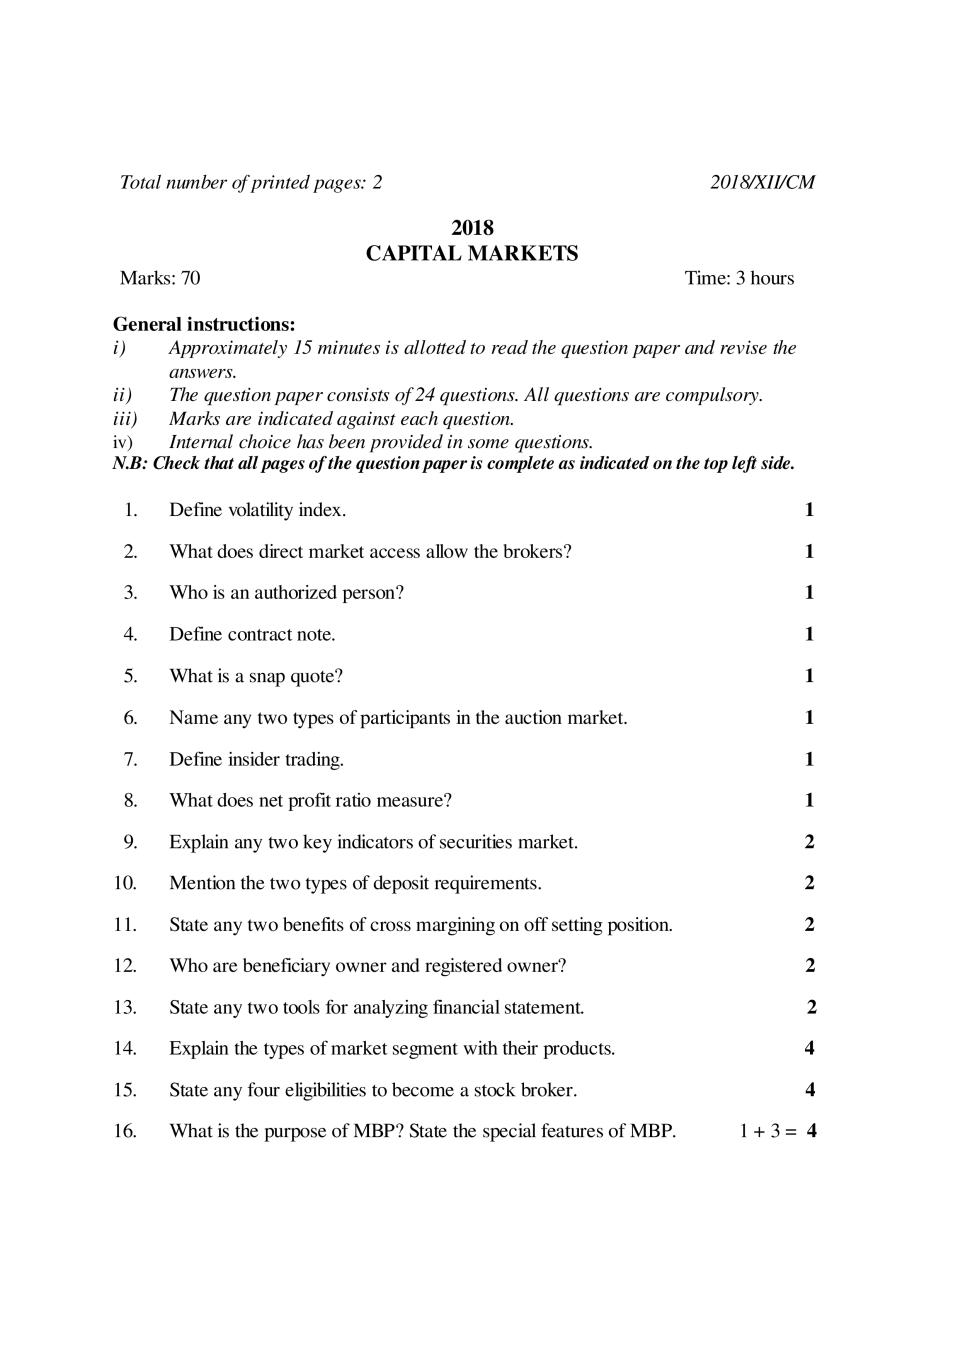 NBSE Class 12 Question Paper 2018 for Capital Markets - Page 1